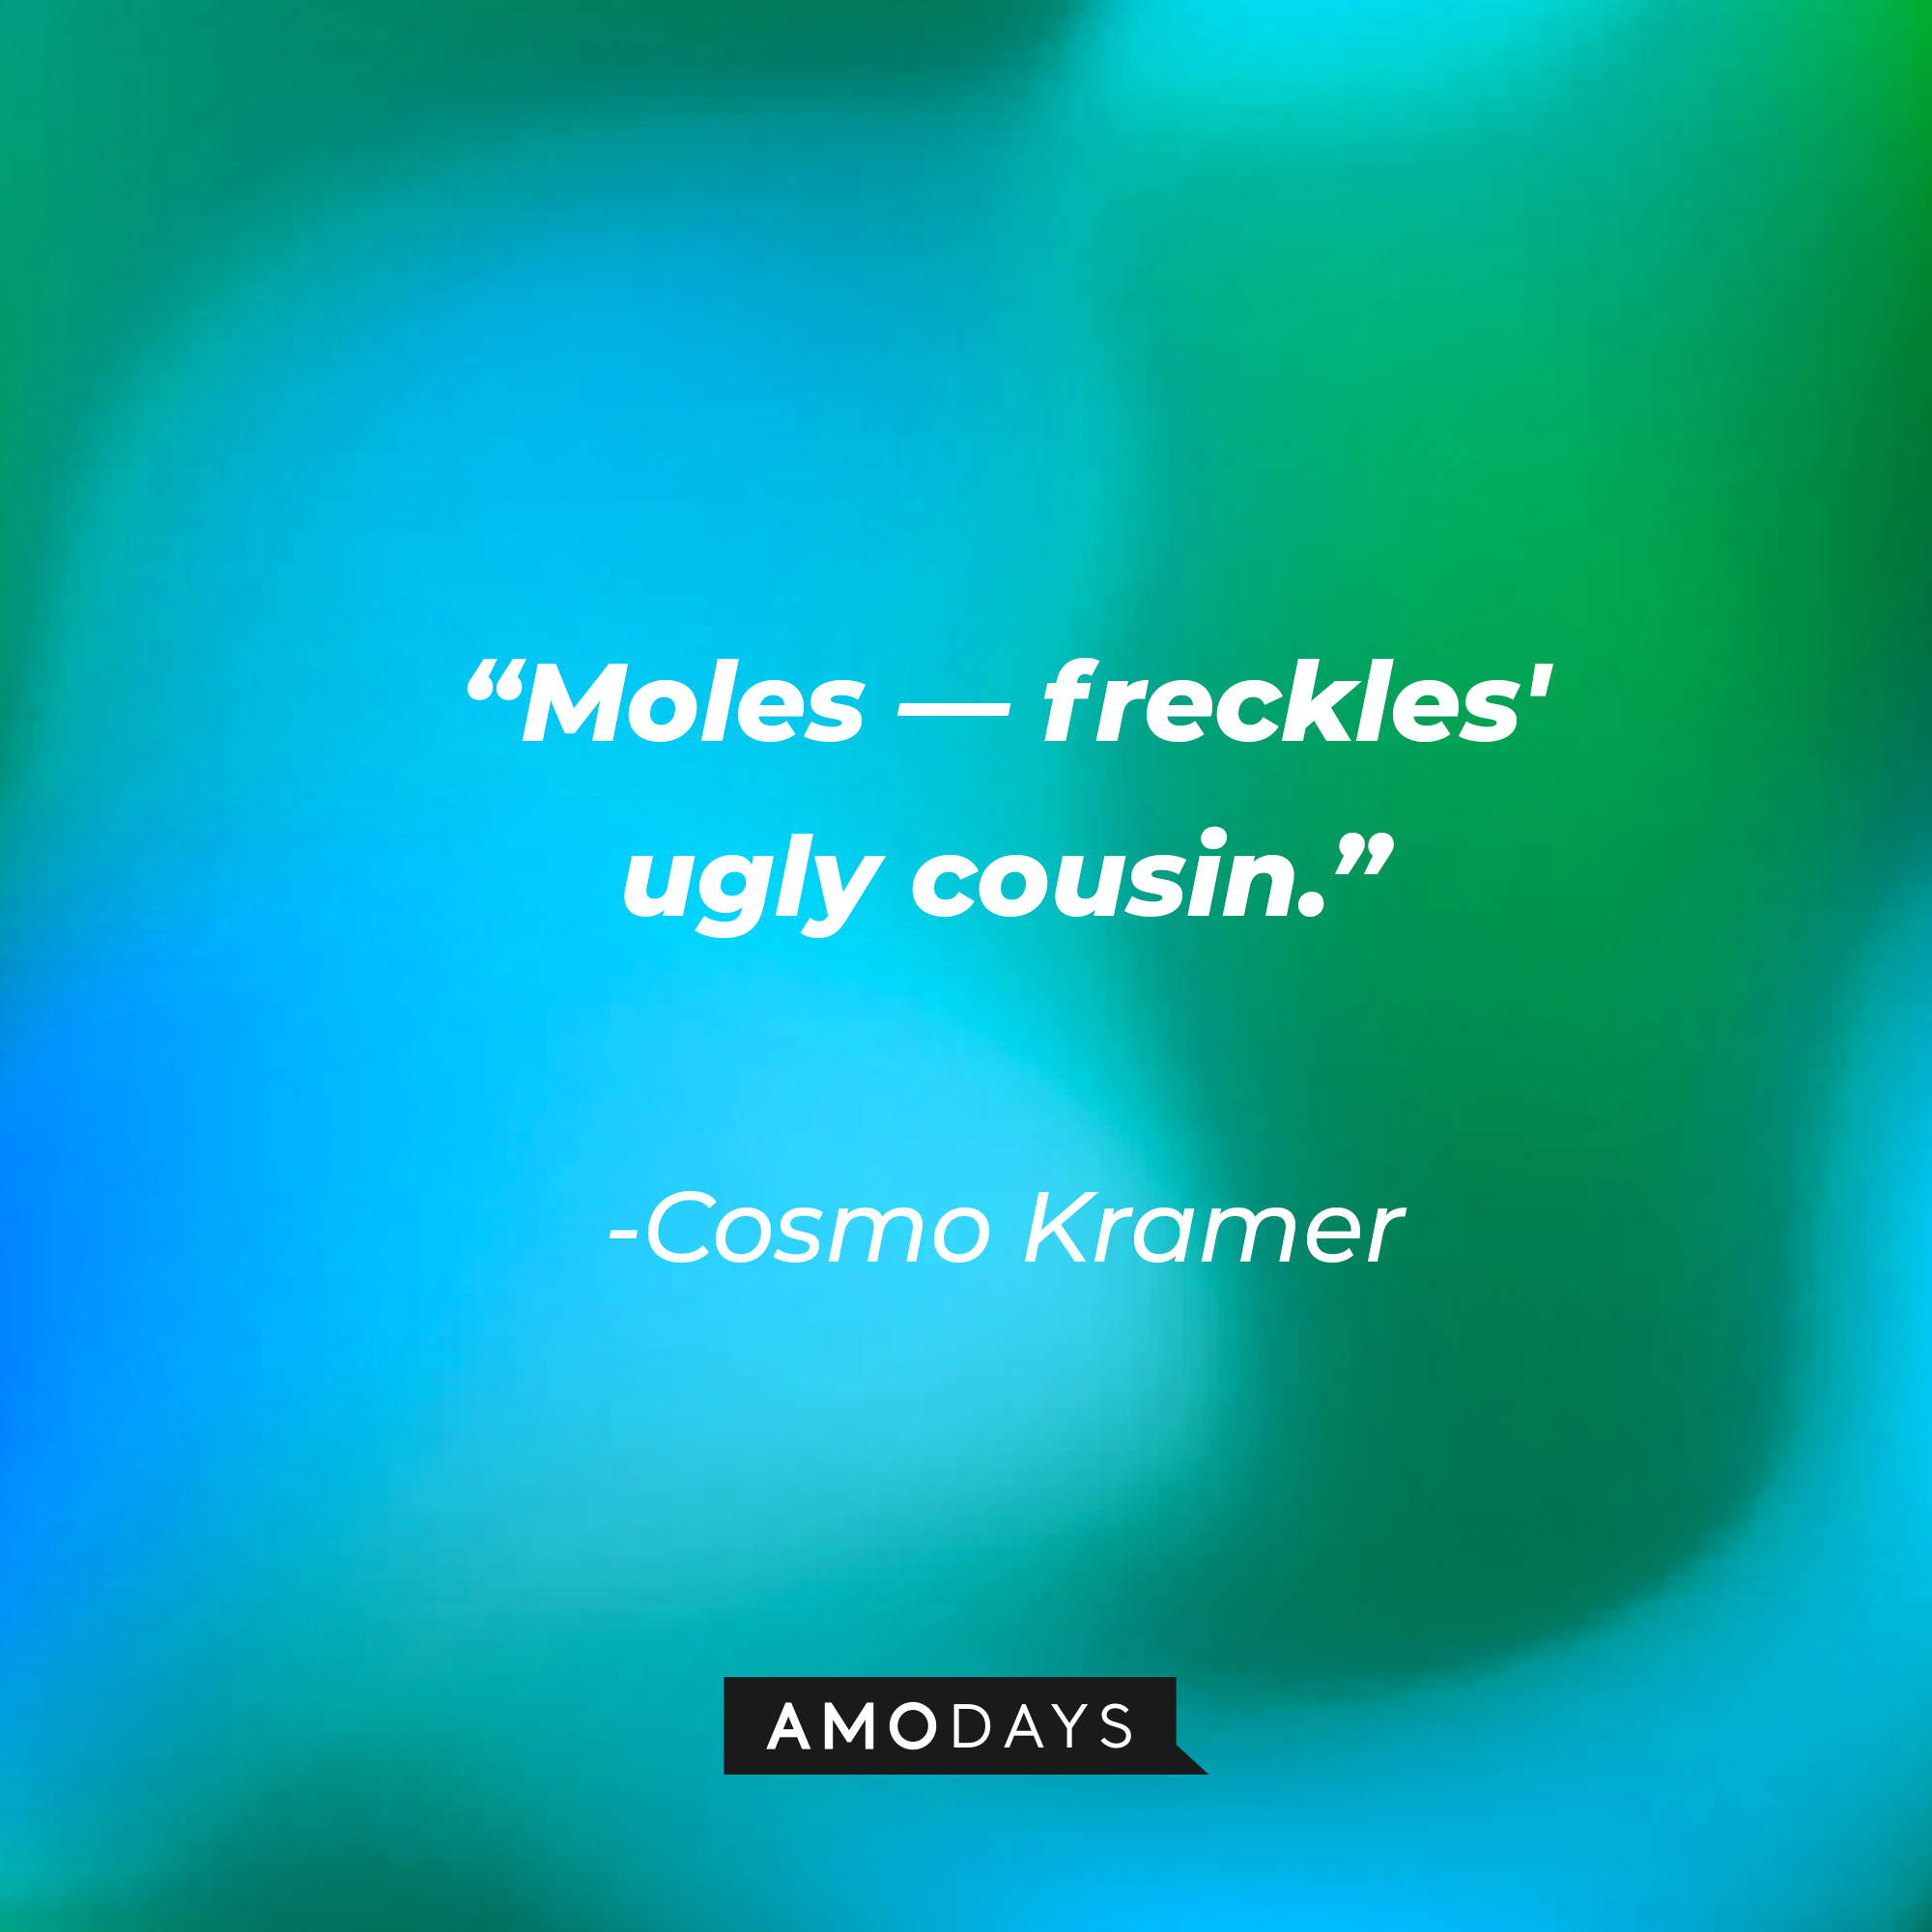 Cosmo Kramer’s quote: “Moles—freckles' ugly cousin.” | Source: AmoDays